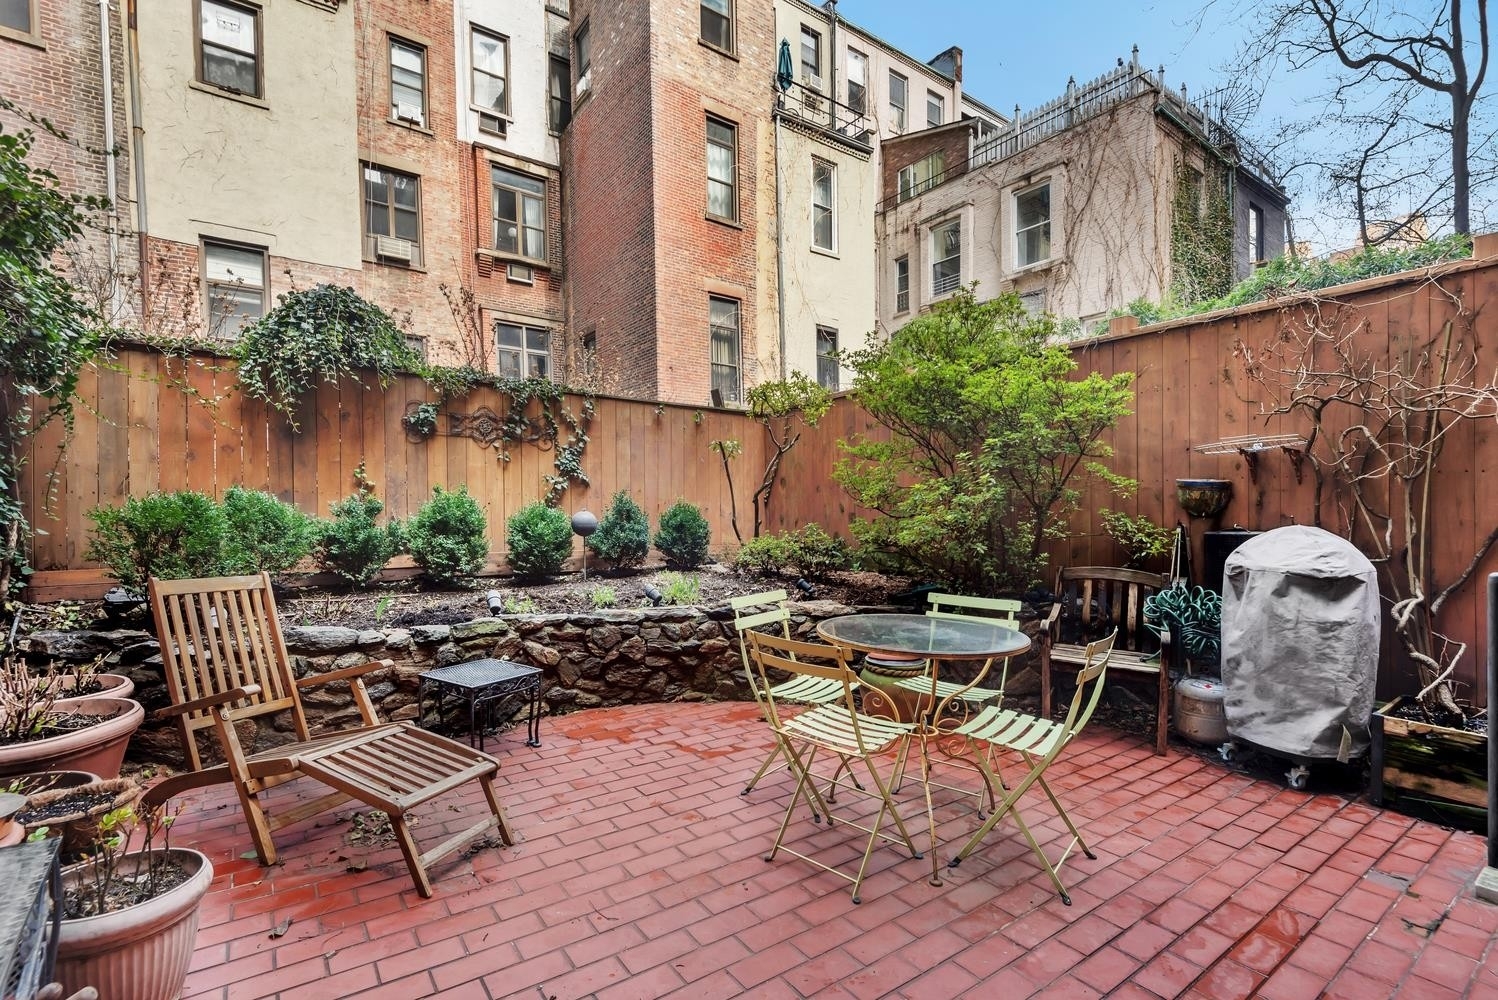 Co-op Properties for Sale at 129 W 70TH ST, 1 Lincoln Square, New York, NY 10023